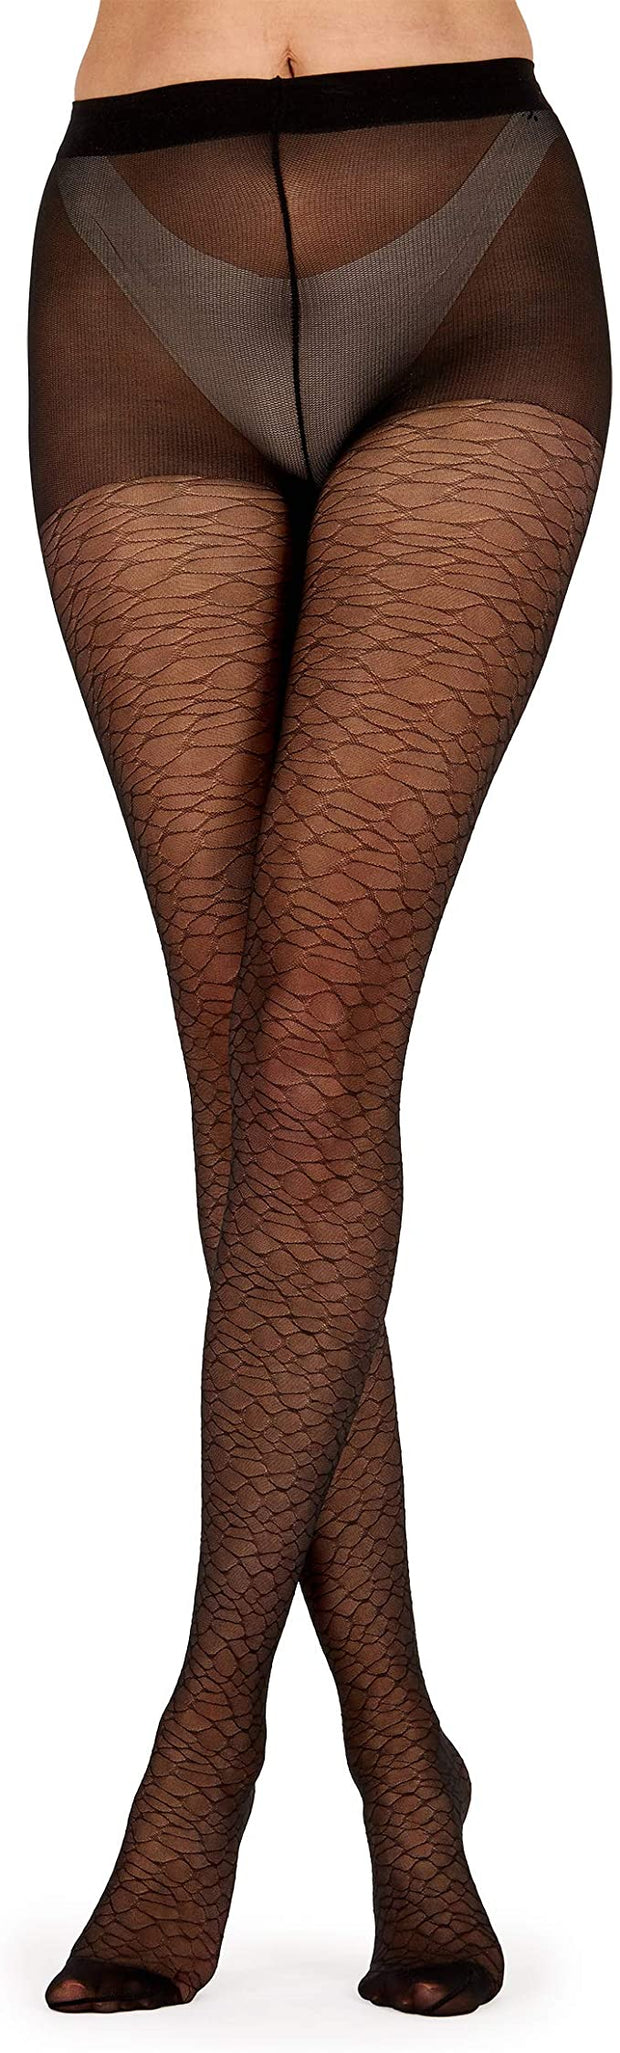 Black Diagonal Check Sheer Tights Plus Size Women's Fashion Tights  Patterned Tights 